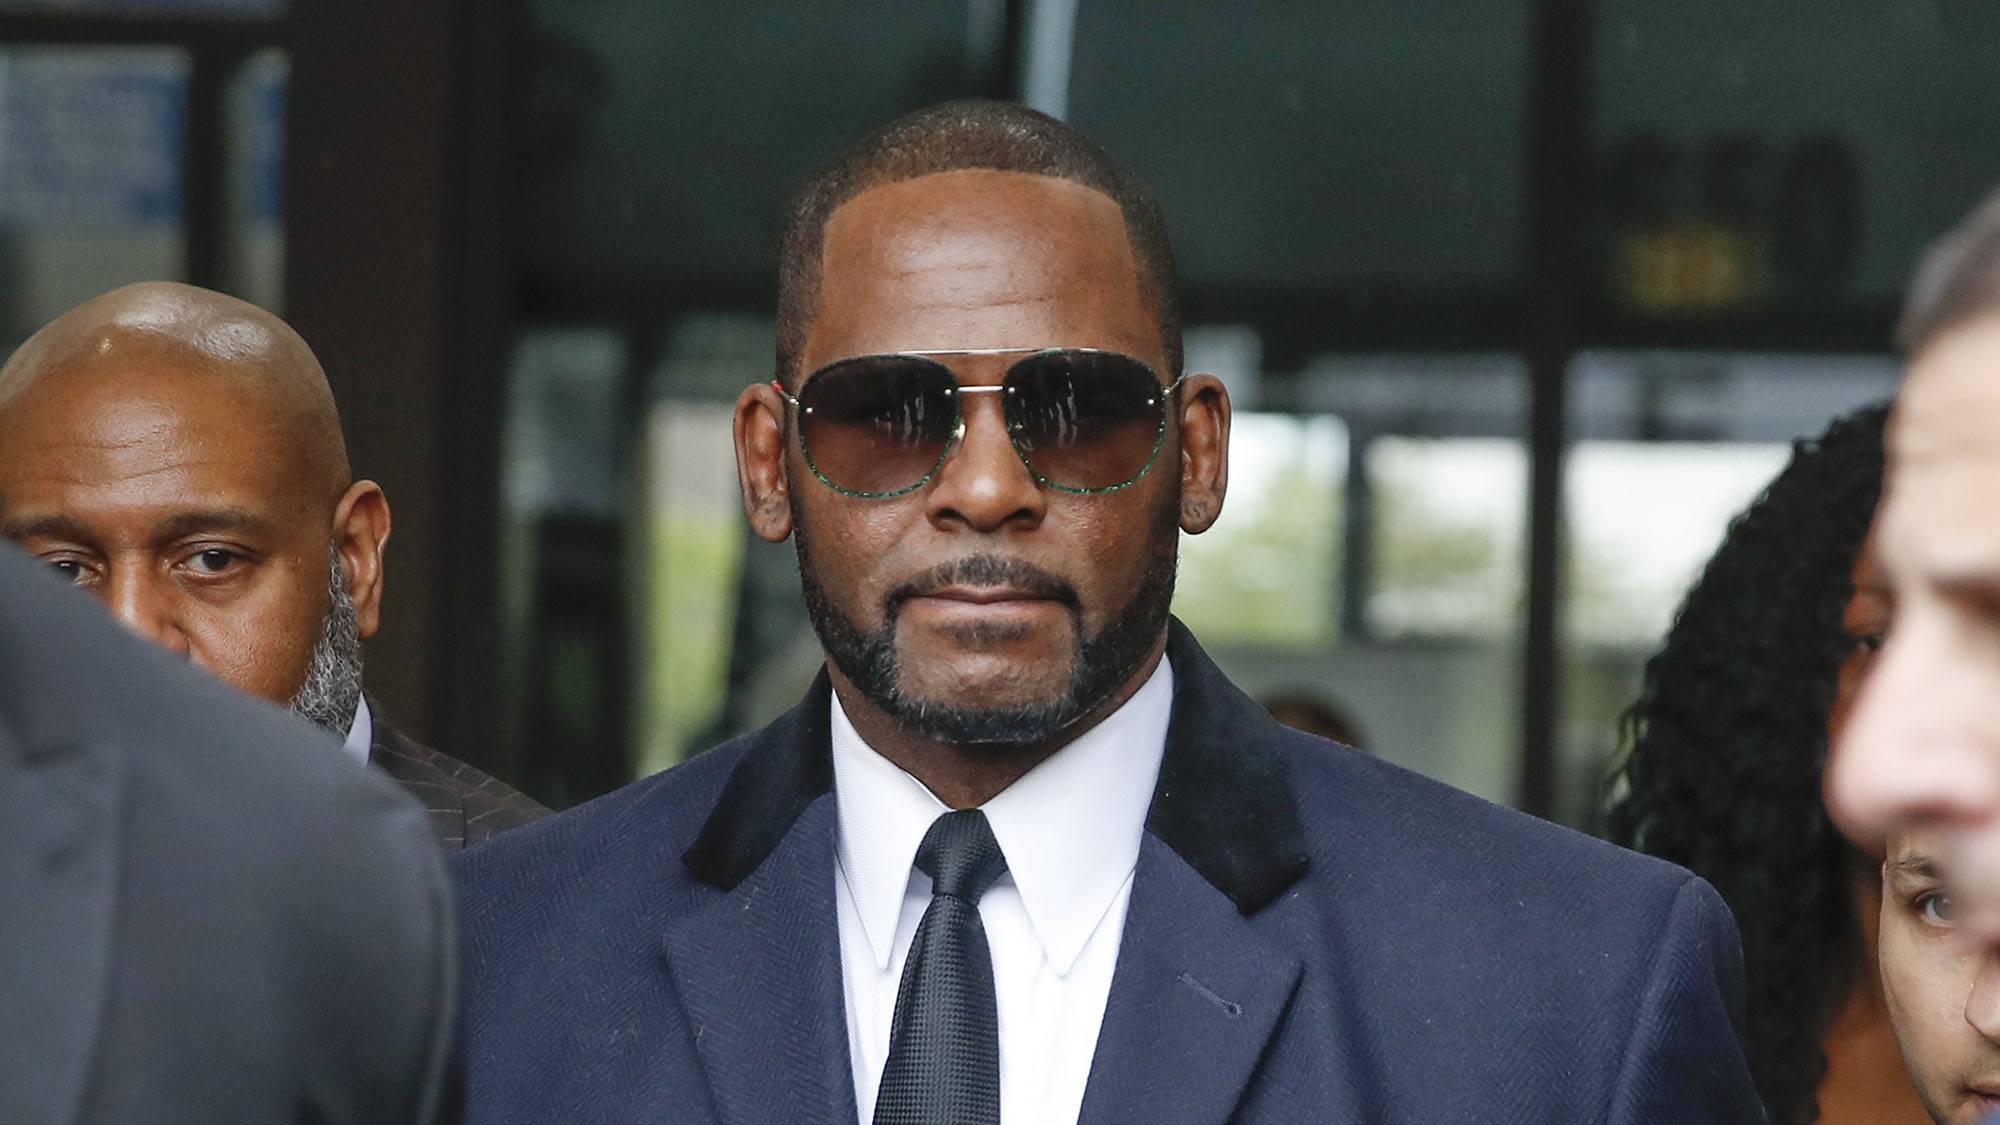 Ponographysex - Girl In Sex Videos Allegedly Recorded By R. Kelly Expected To Testify |  News | BET